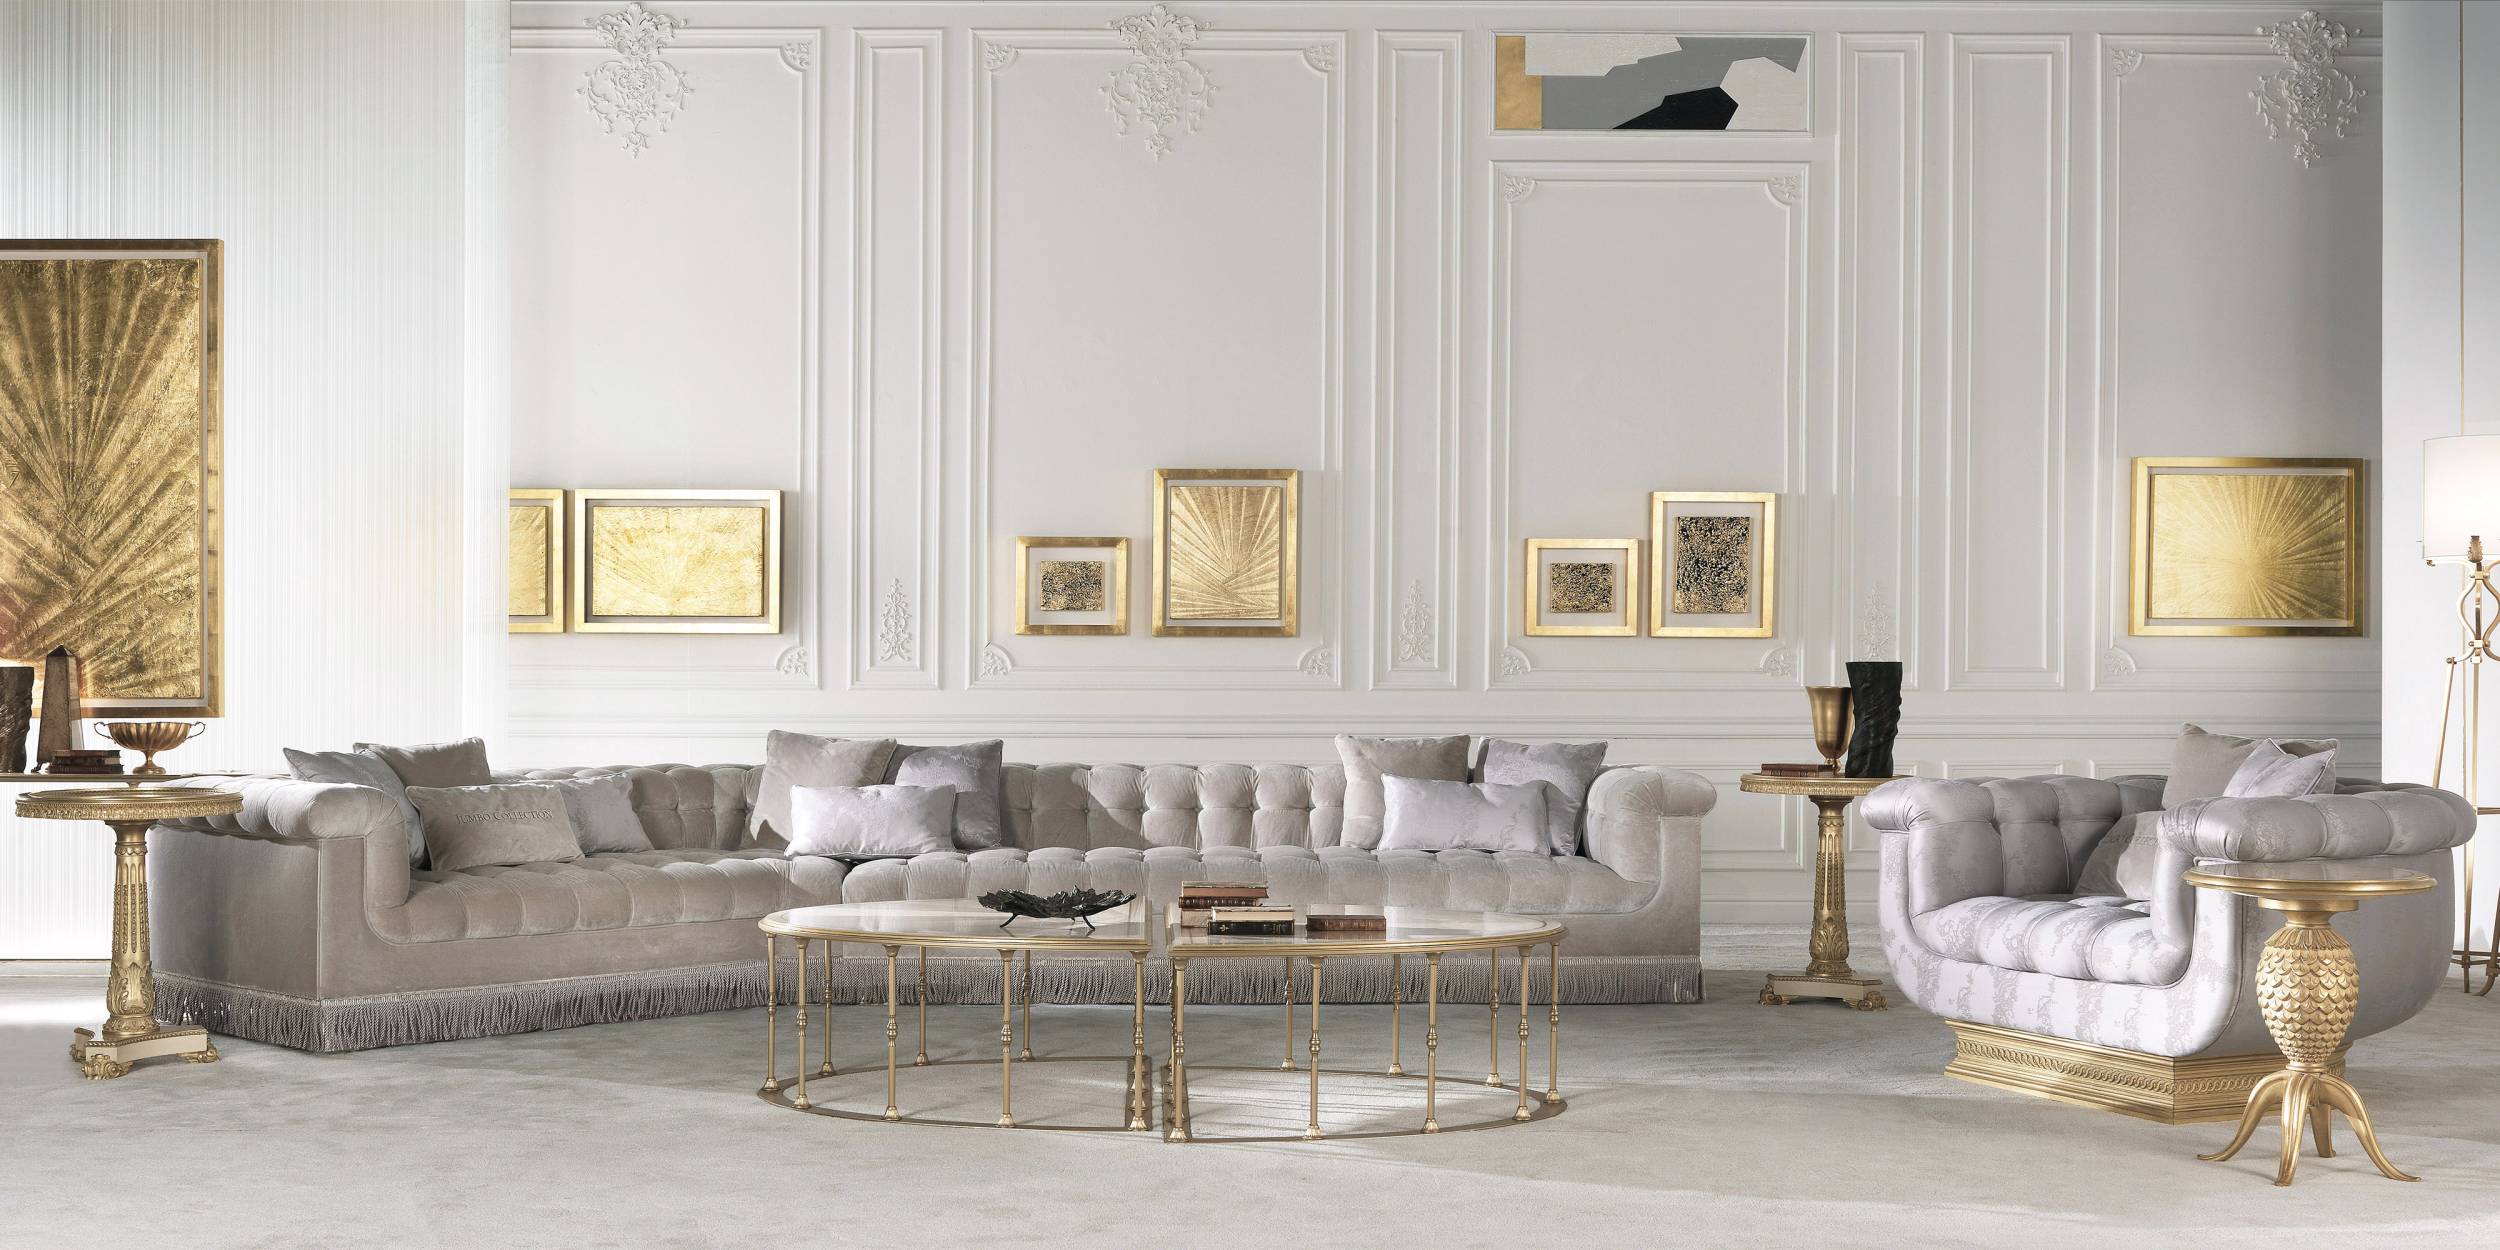 JC_2020_THE-FRENCH-APARTMENT_catalogue_HEADER